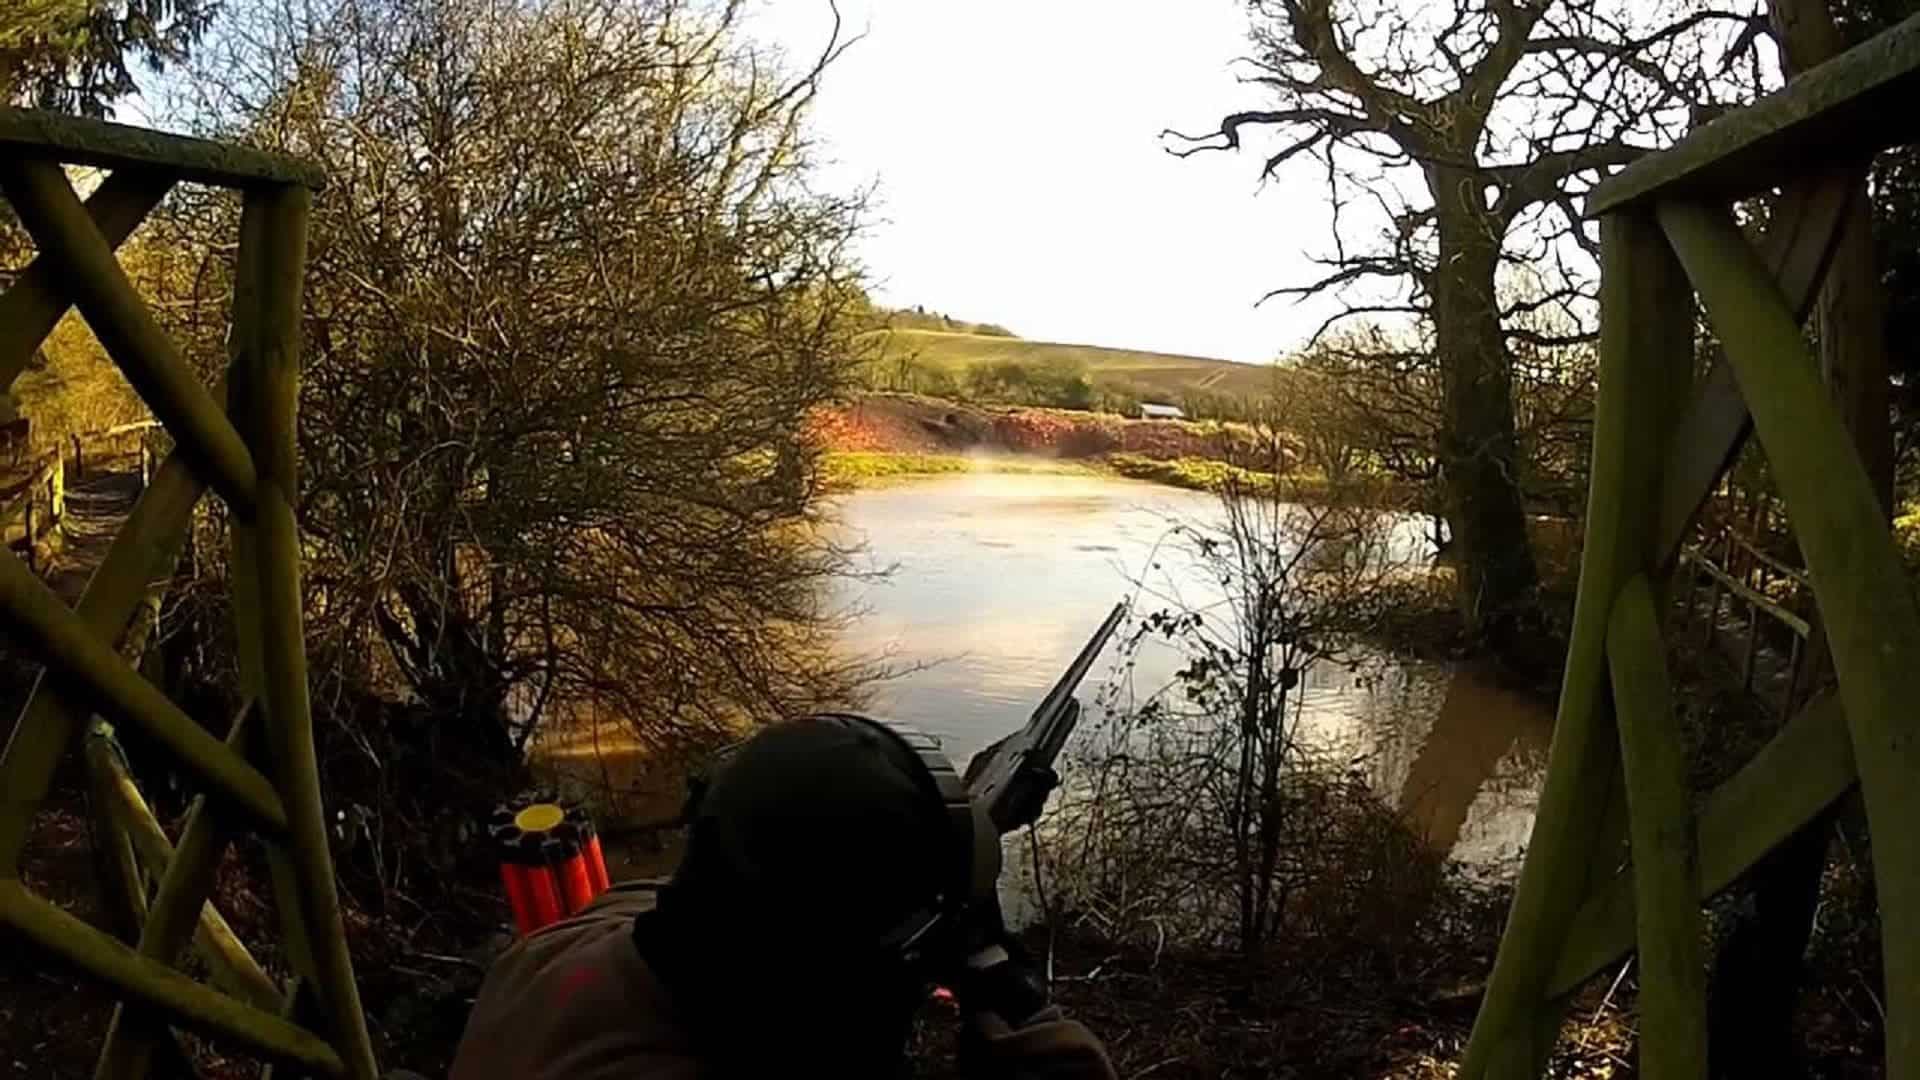 Hereford & Worcester Shooting Ground in UK